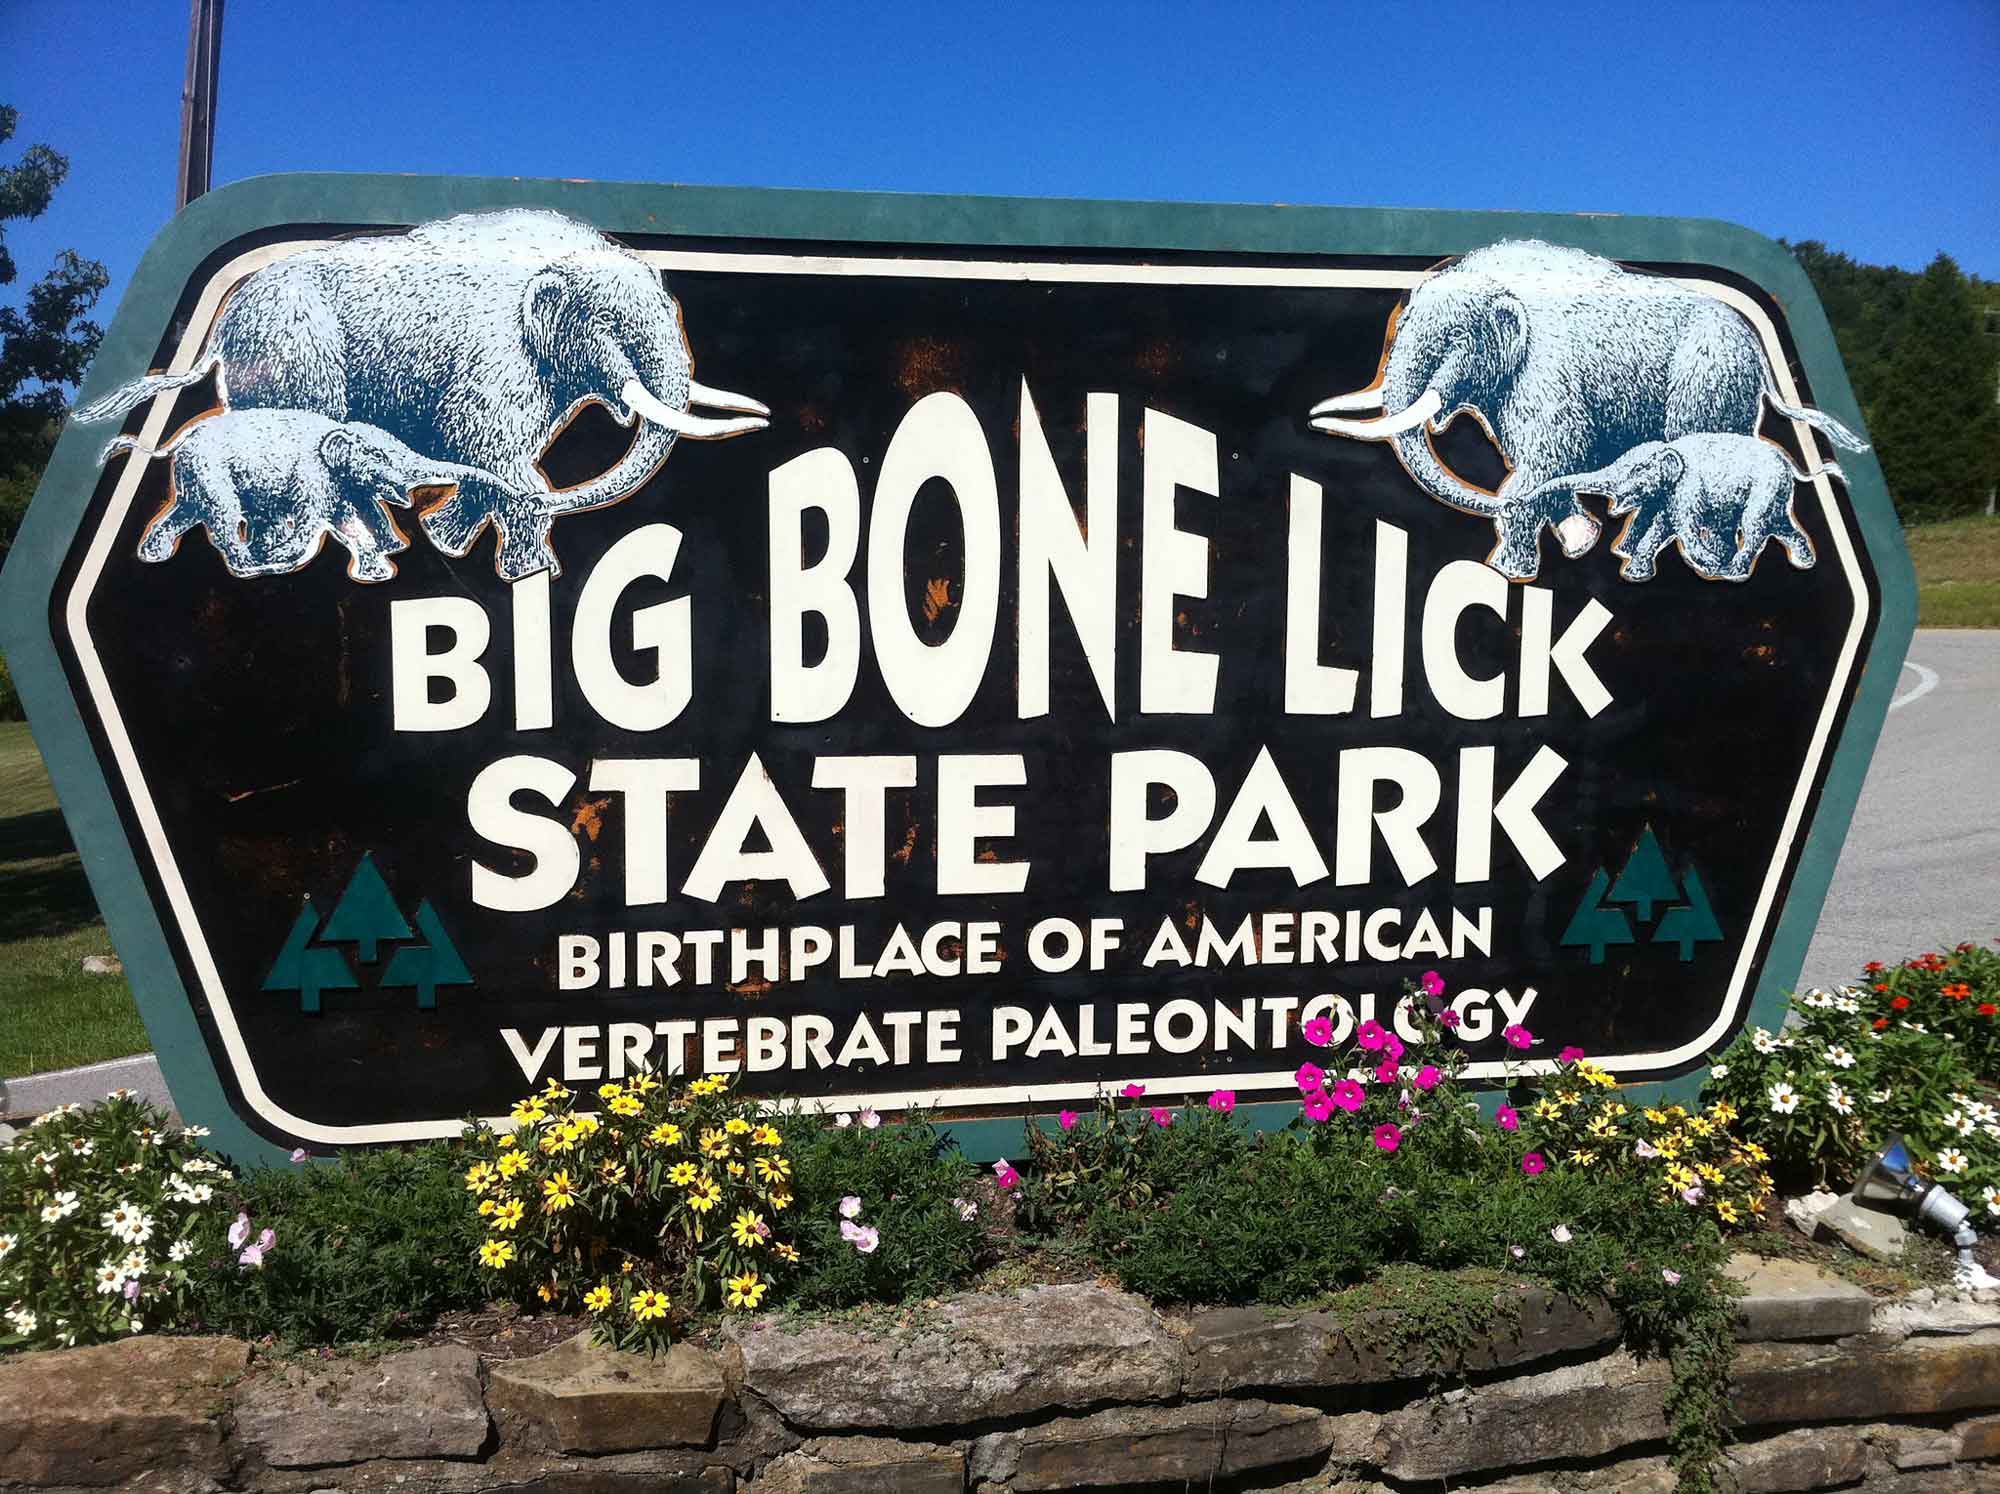 Photograph of the sign at the entrance to Big Bone Lick State Park